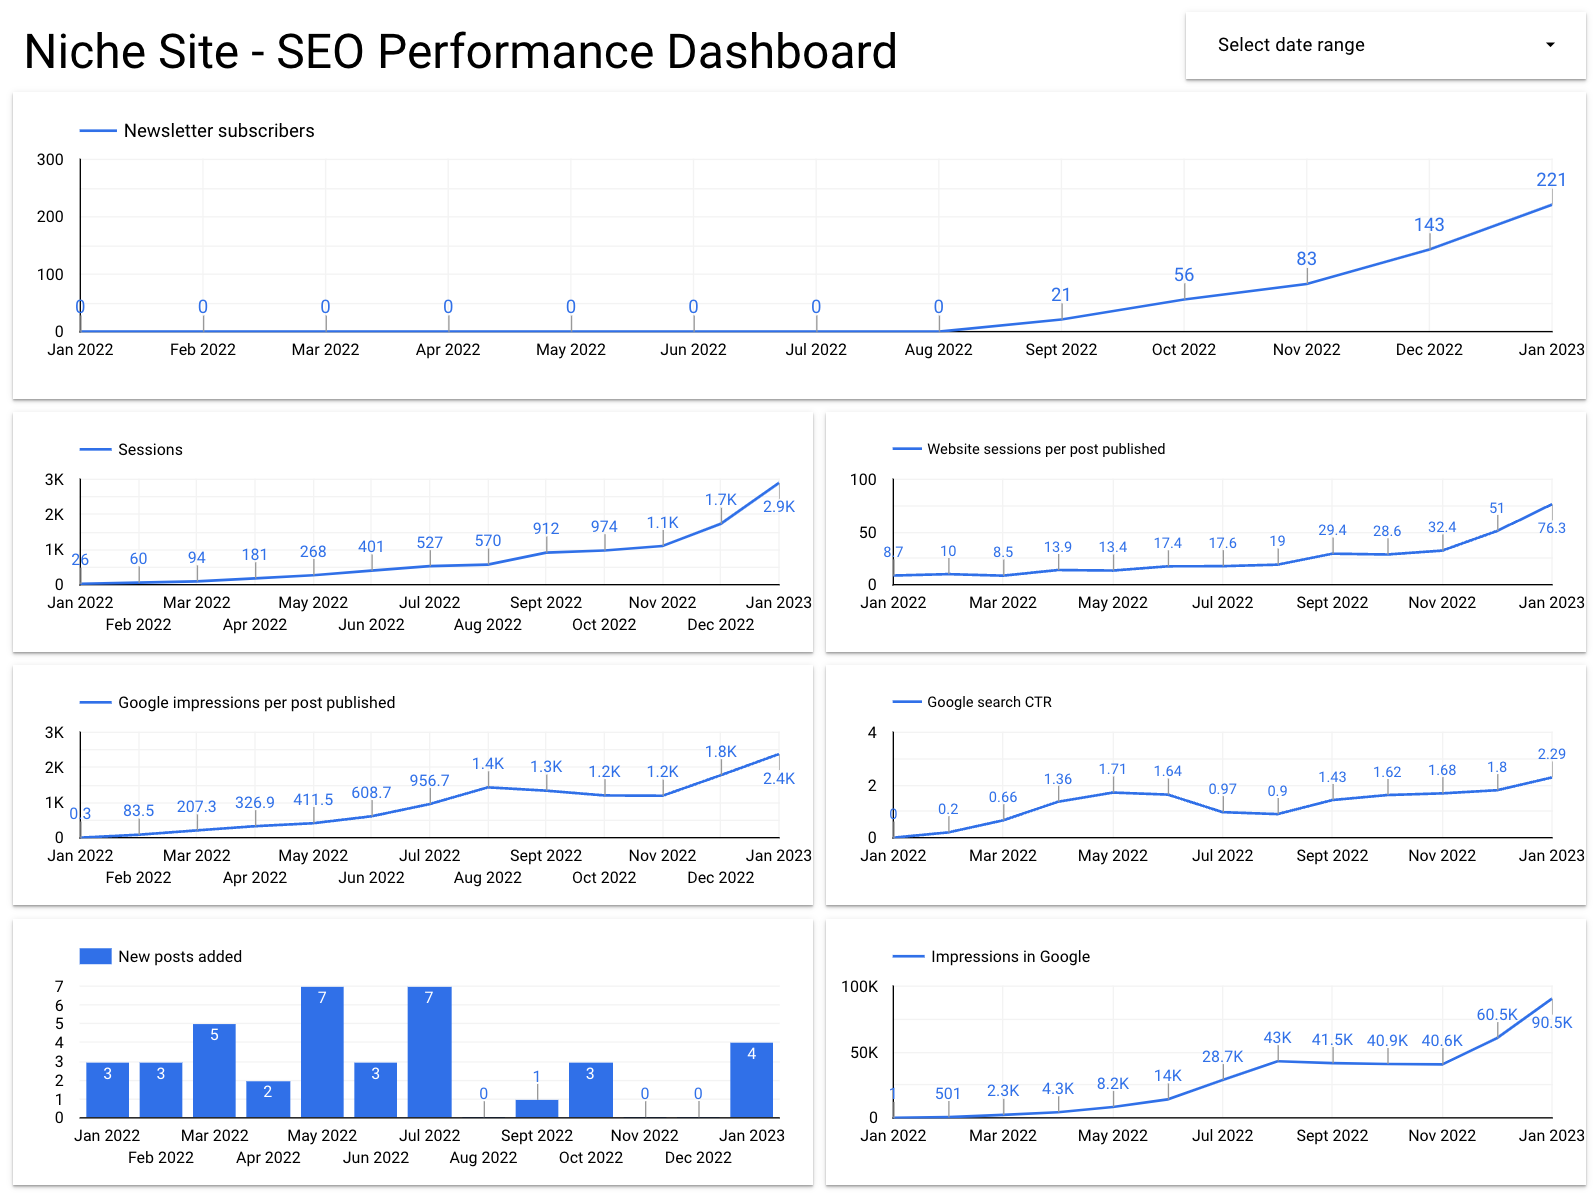 Performance dashboard for SEO niche site until February 2023